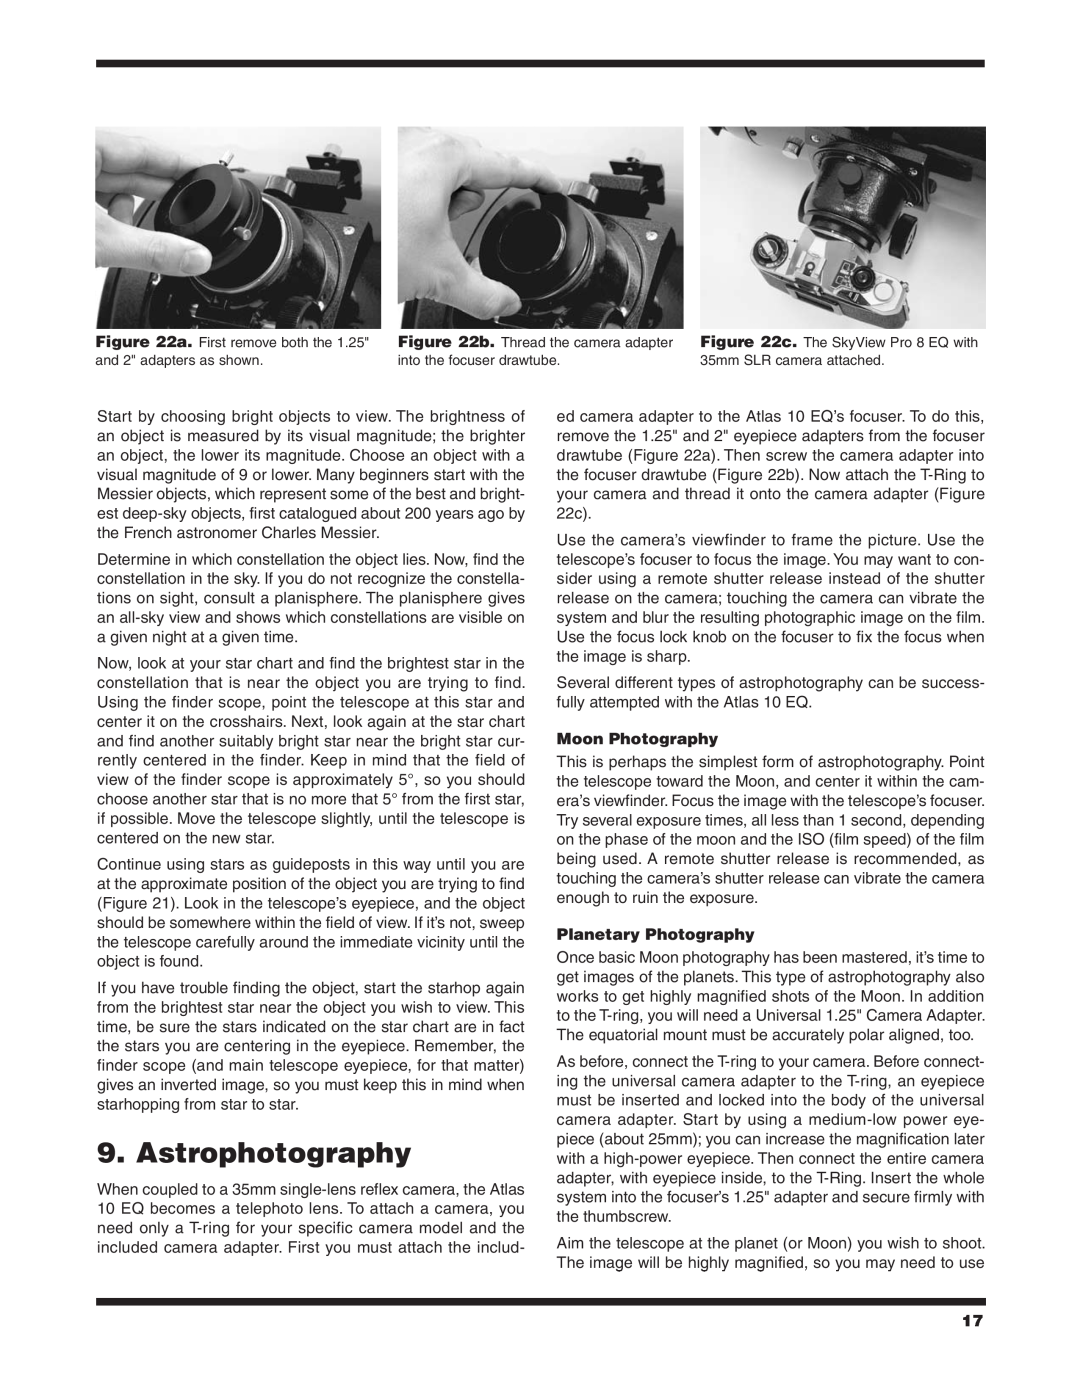 Orion 9874 instruction manual Astrophotography, Moon Photography, Planetary Photography 